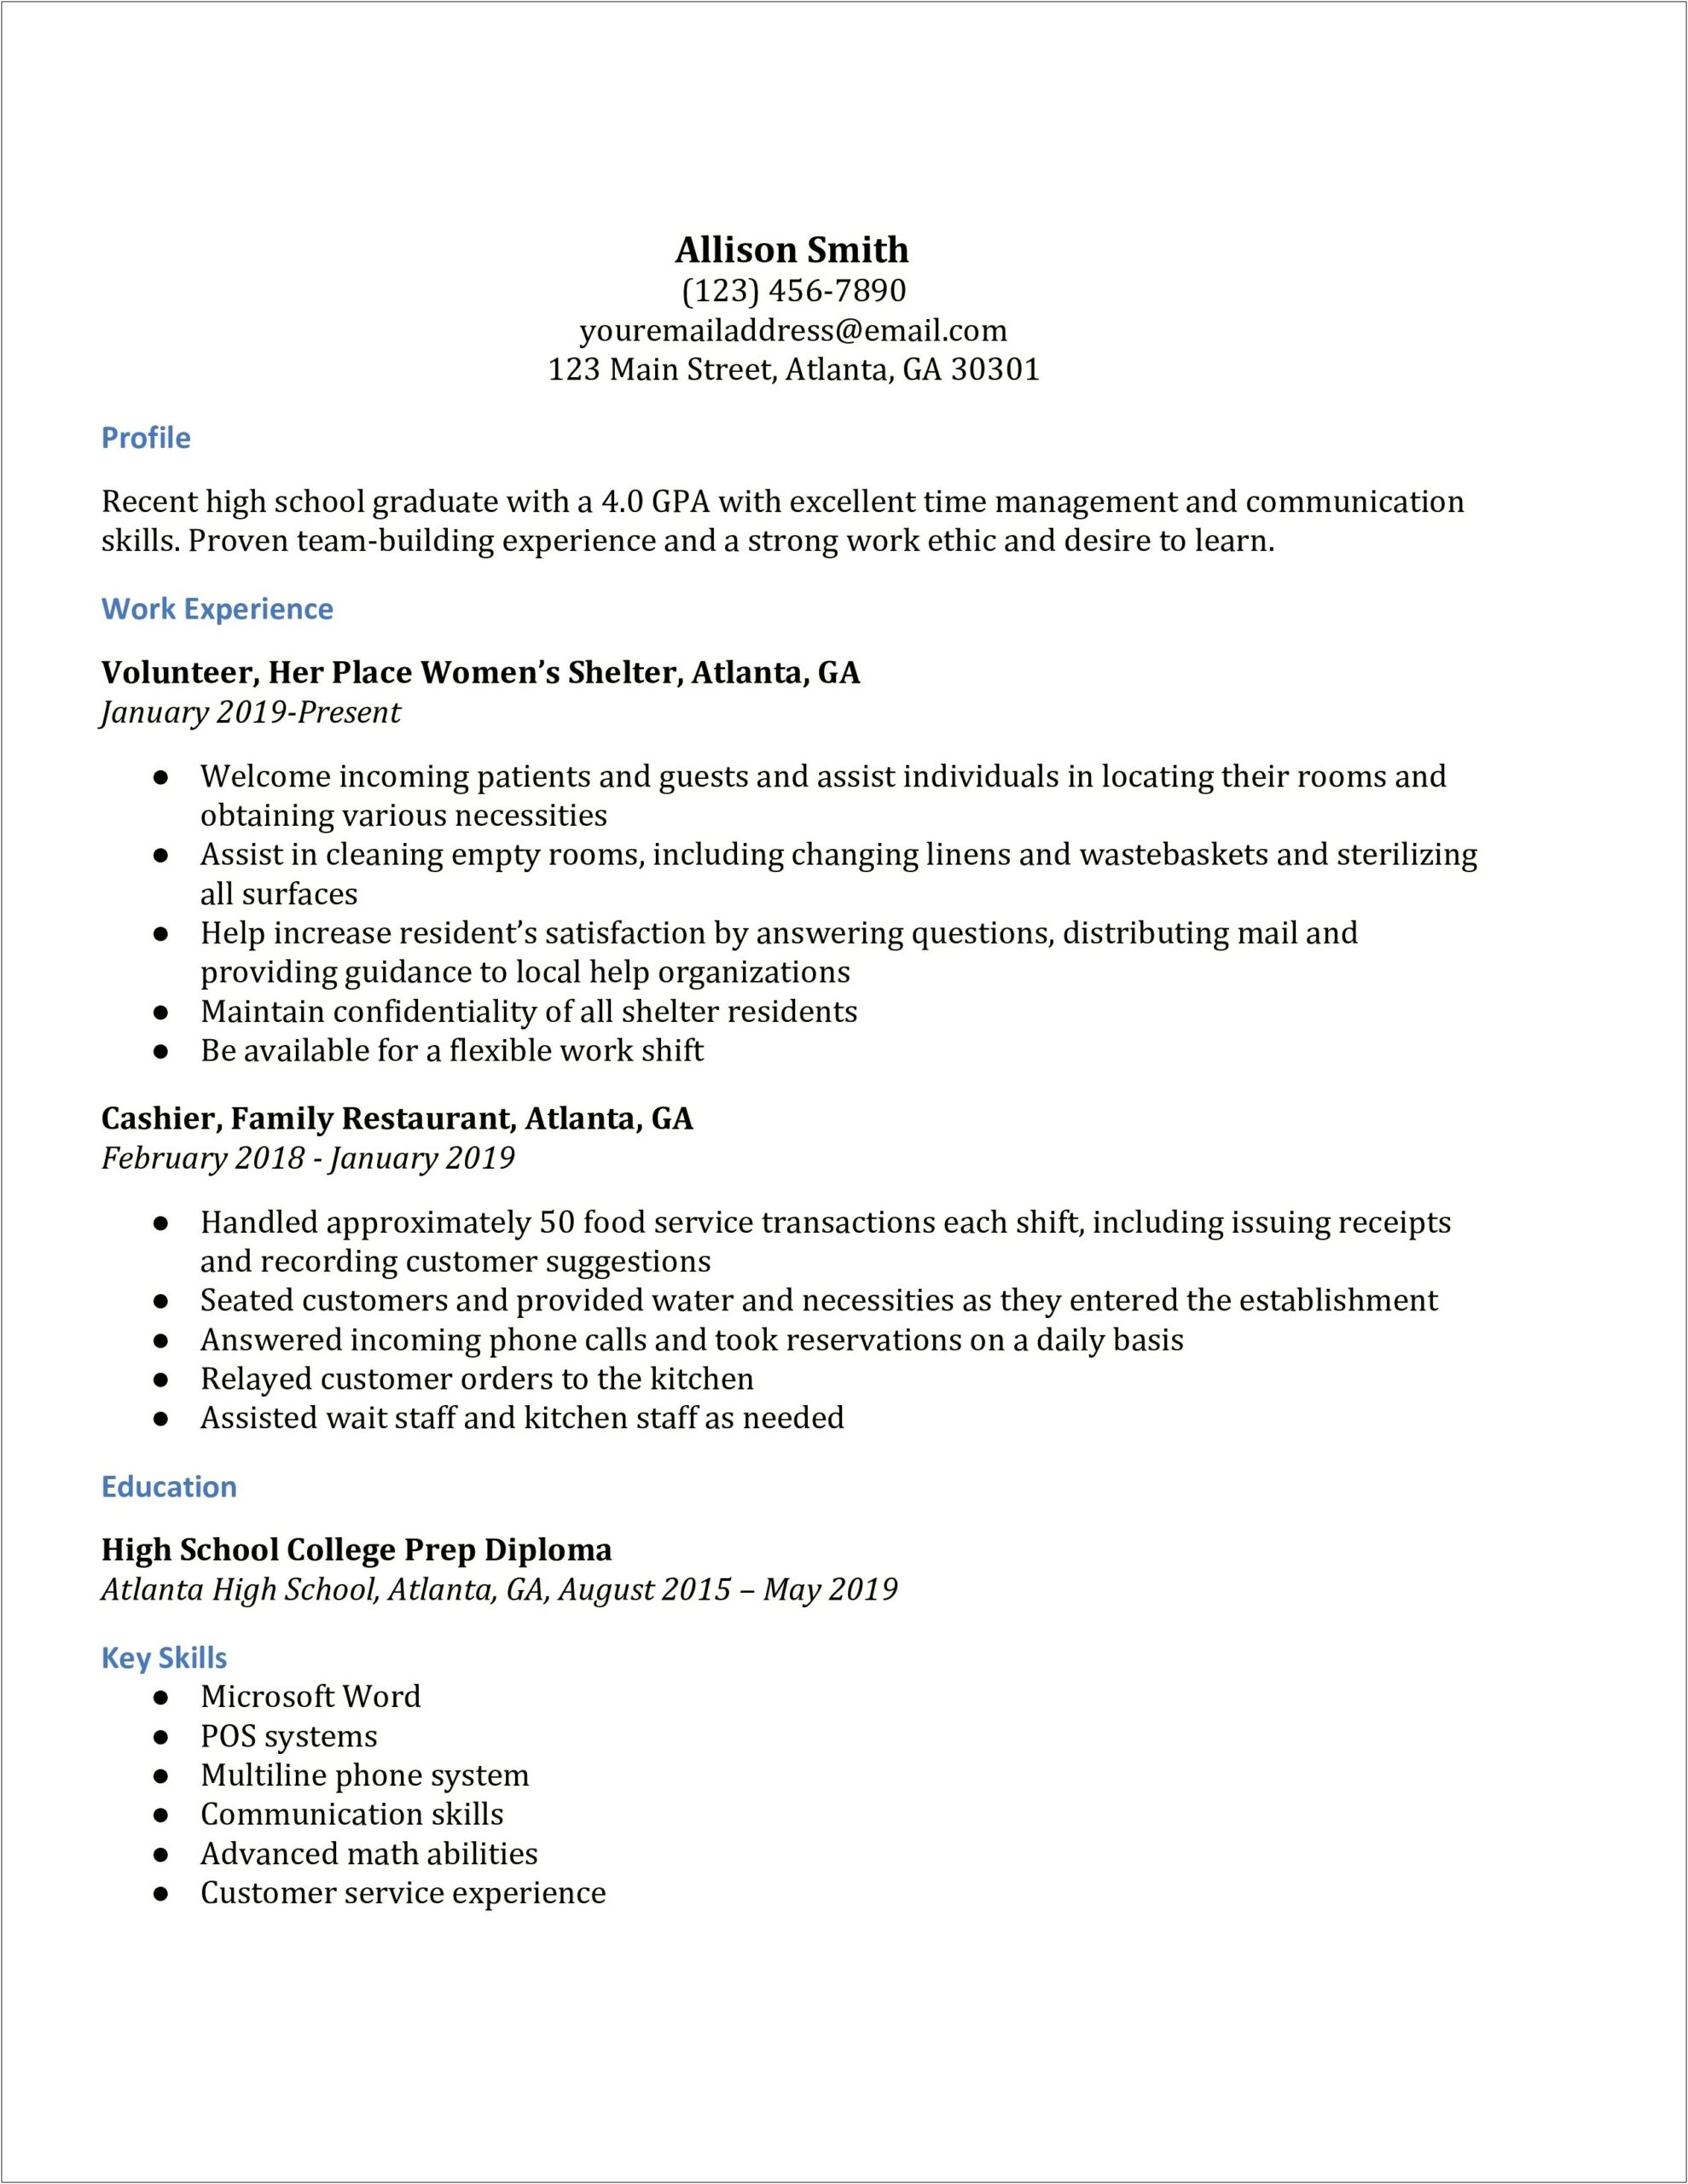 Resume For High School Letter Of Recommendation